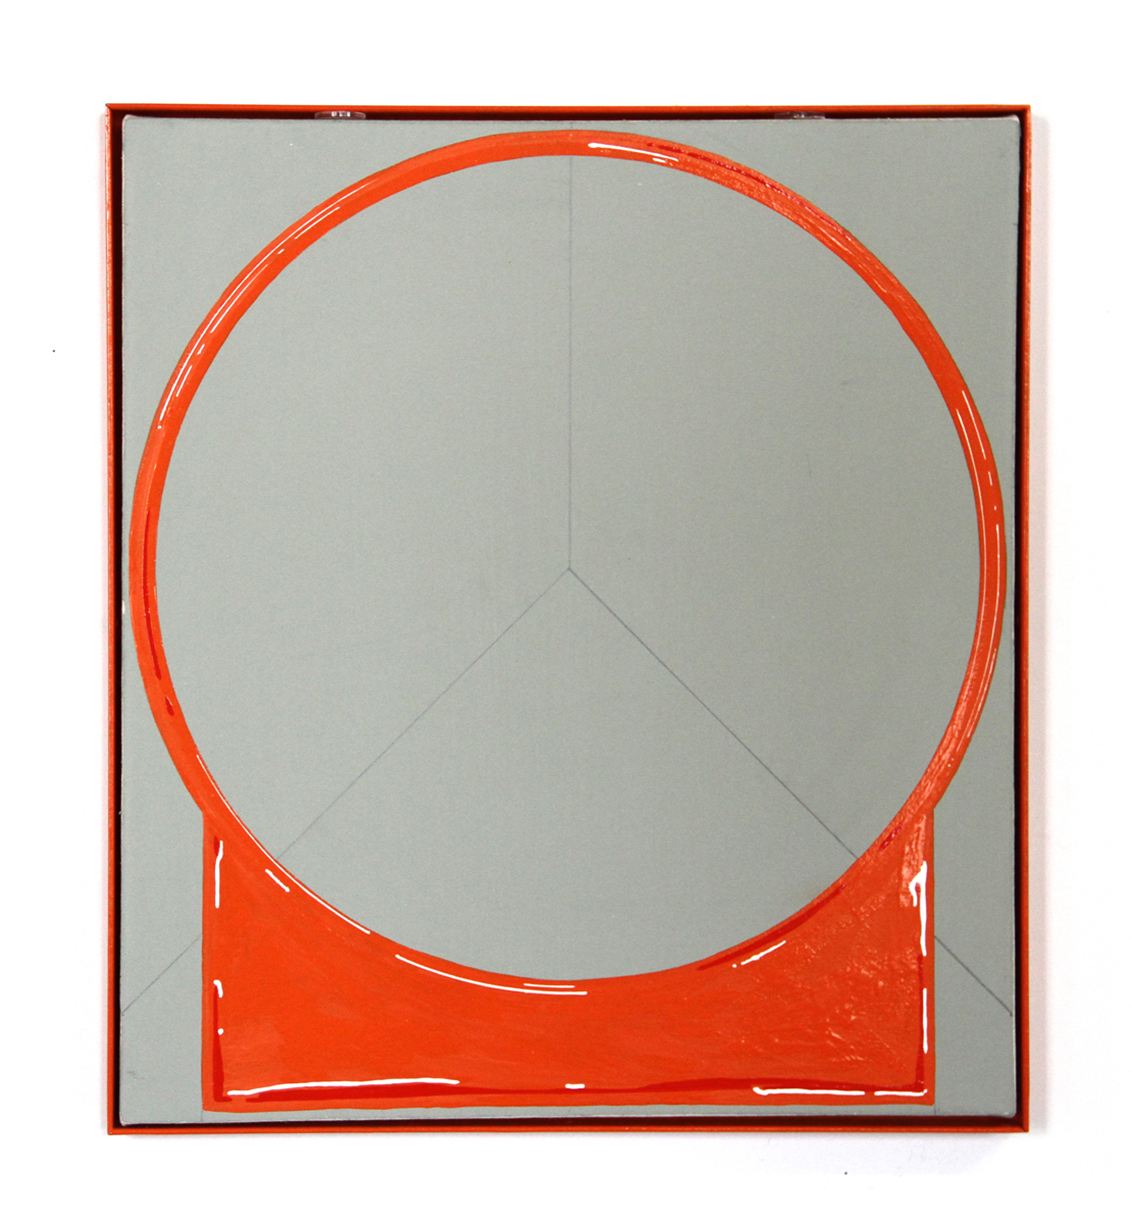 Practice Makes Perfect, 2016, enamel, gesso on canvas, powder-coated steel, 19.5 x 17.5 inches